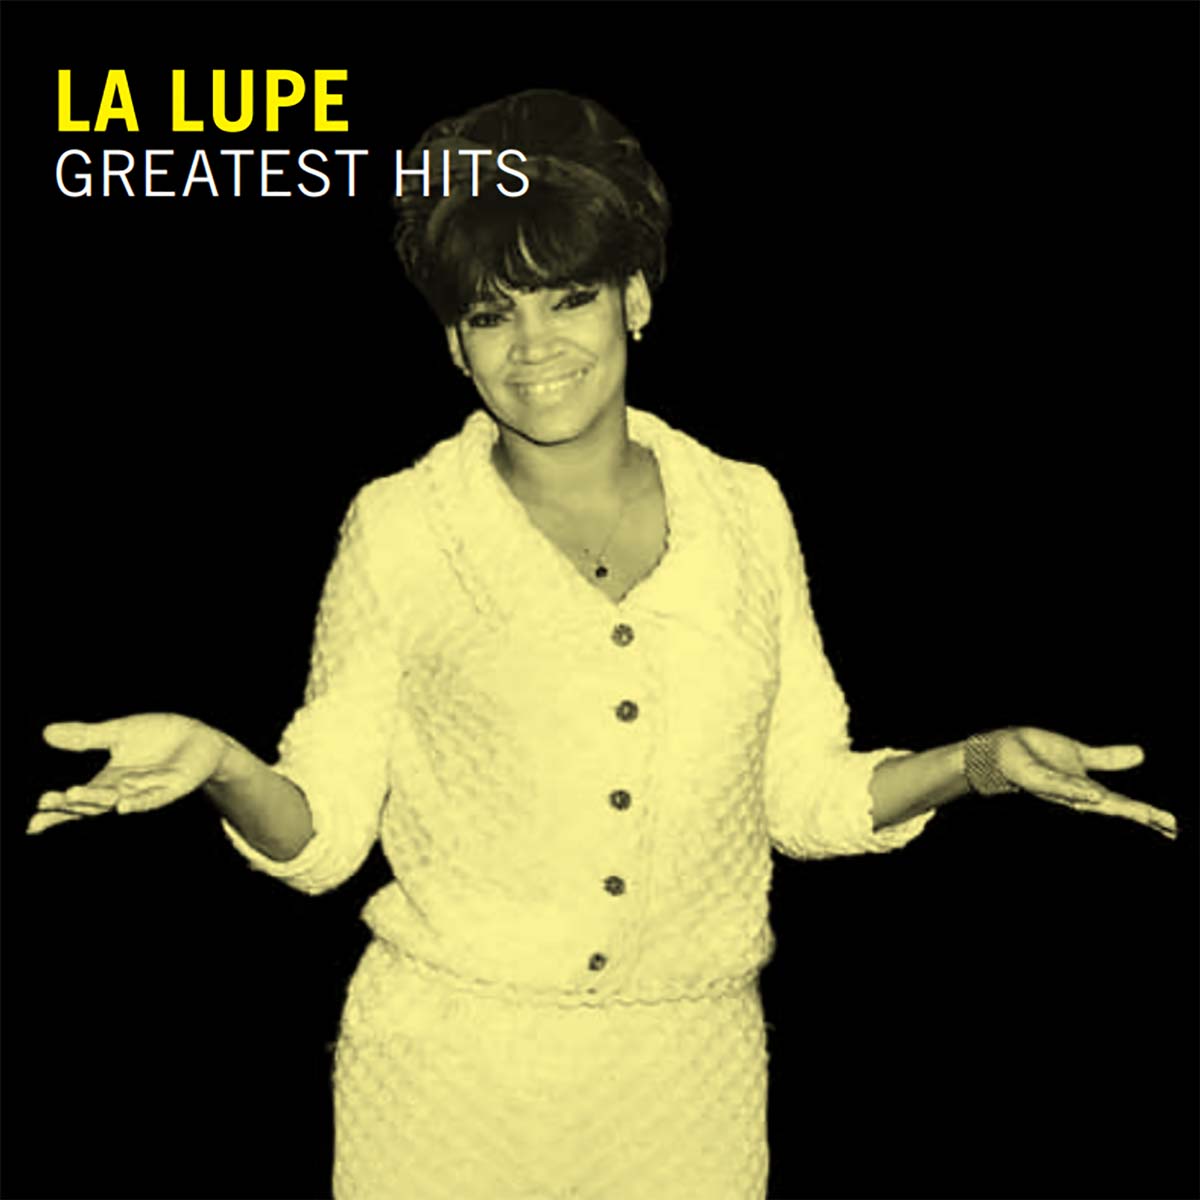 Featured Image for “LA LUPE – GREATEST HITS”